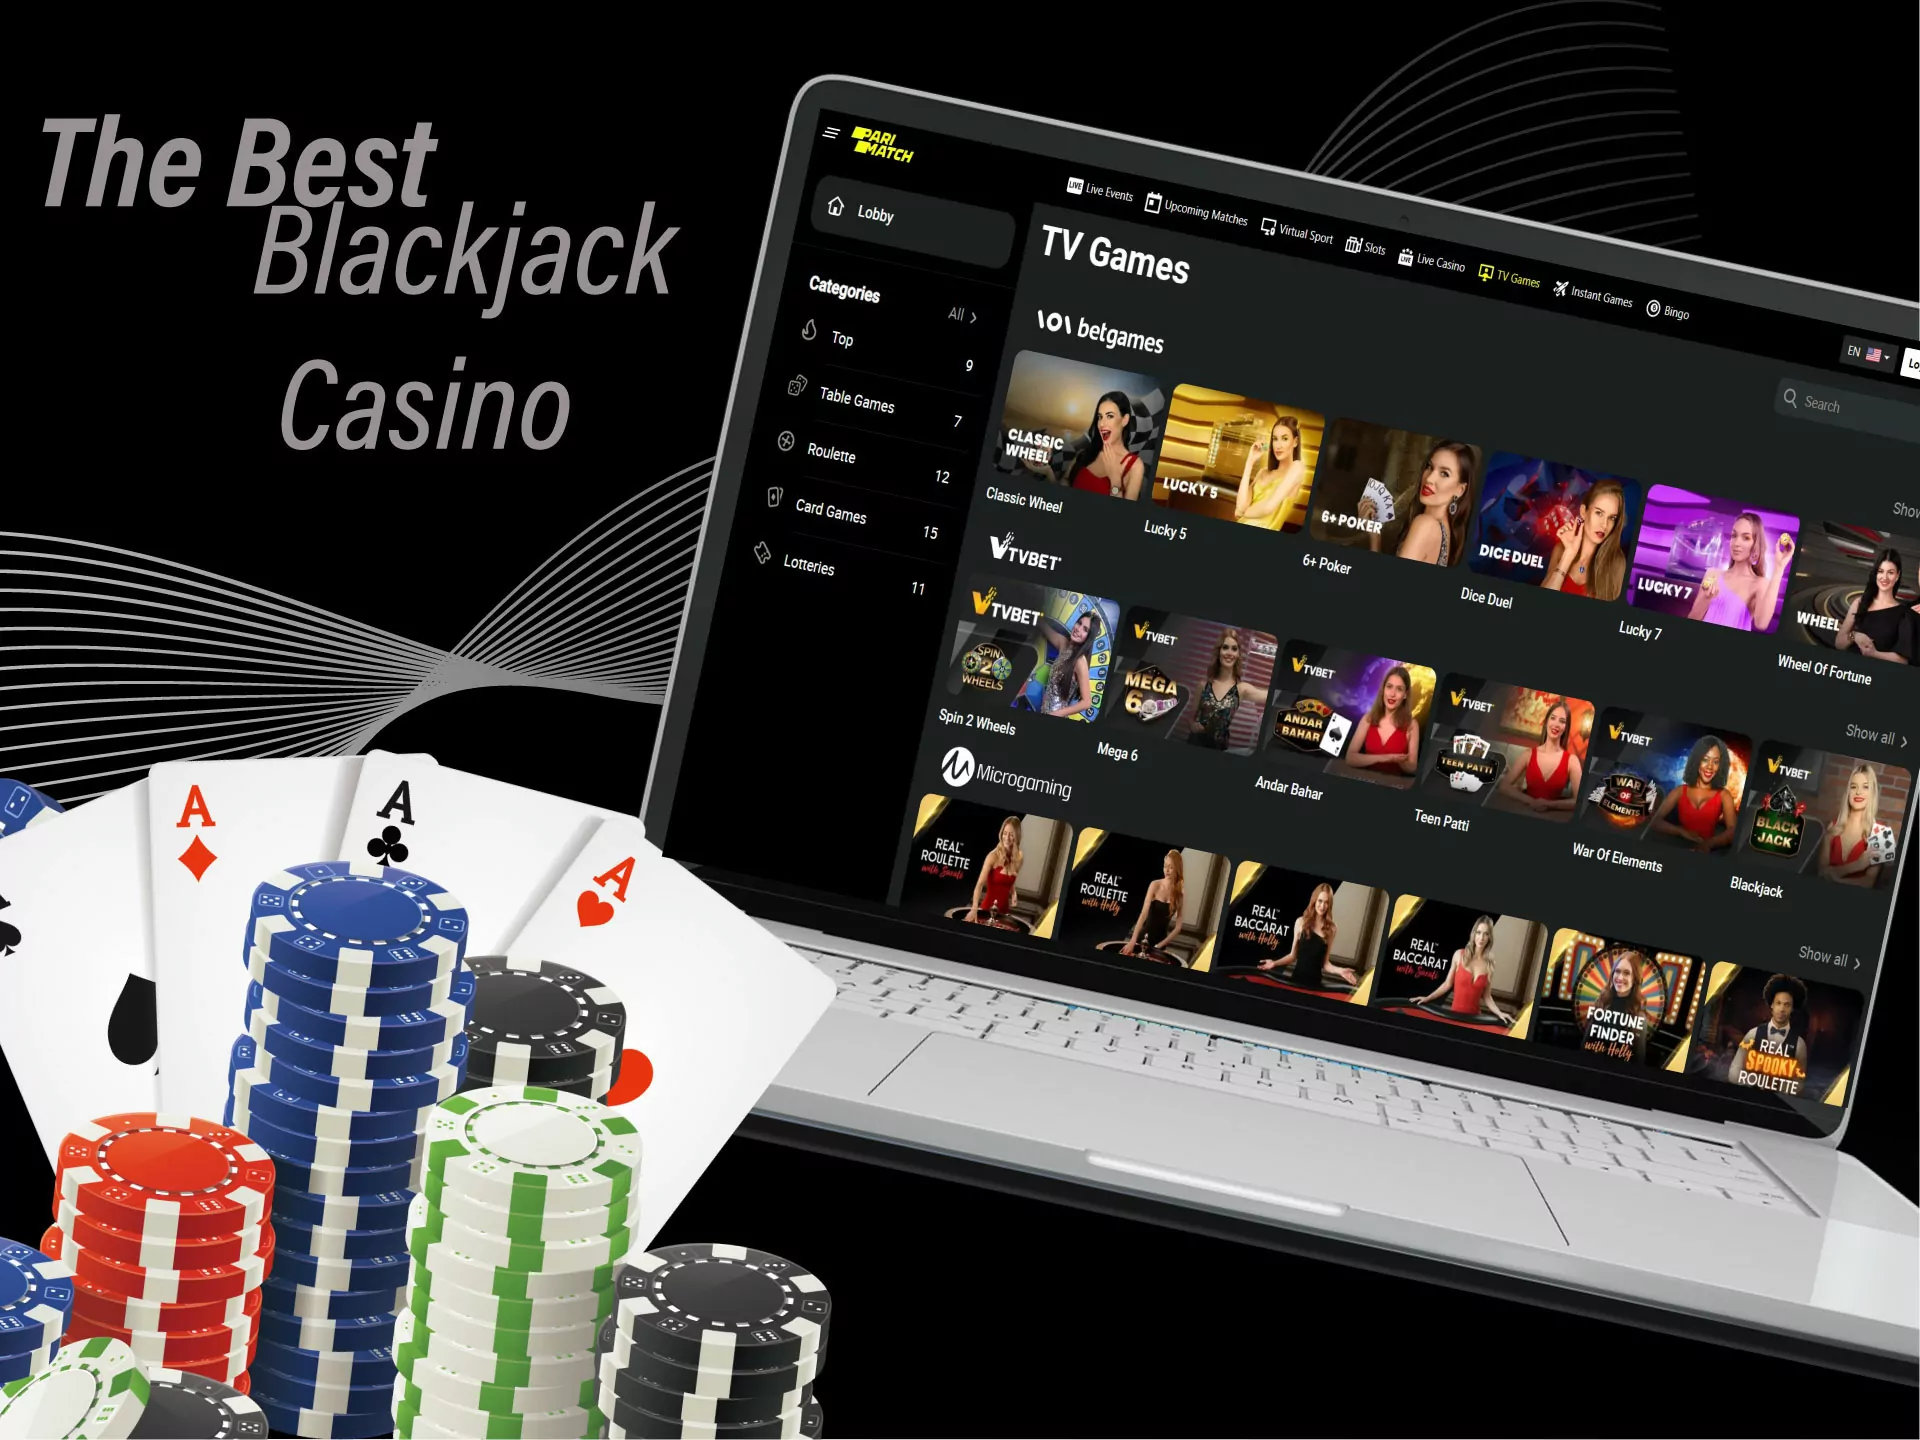 Read how to choose the best casino for blackjack playing.